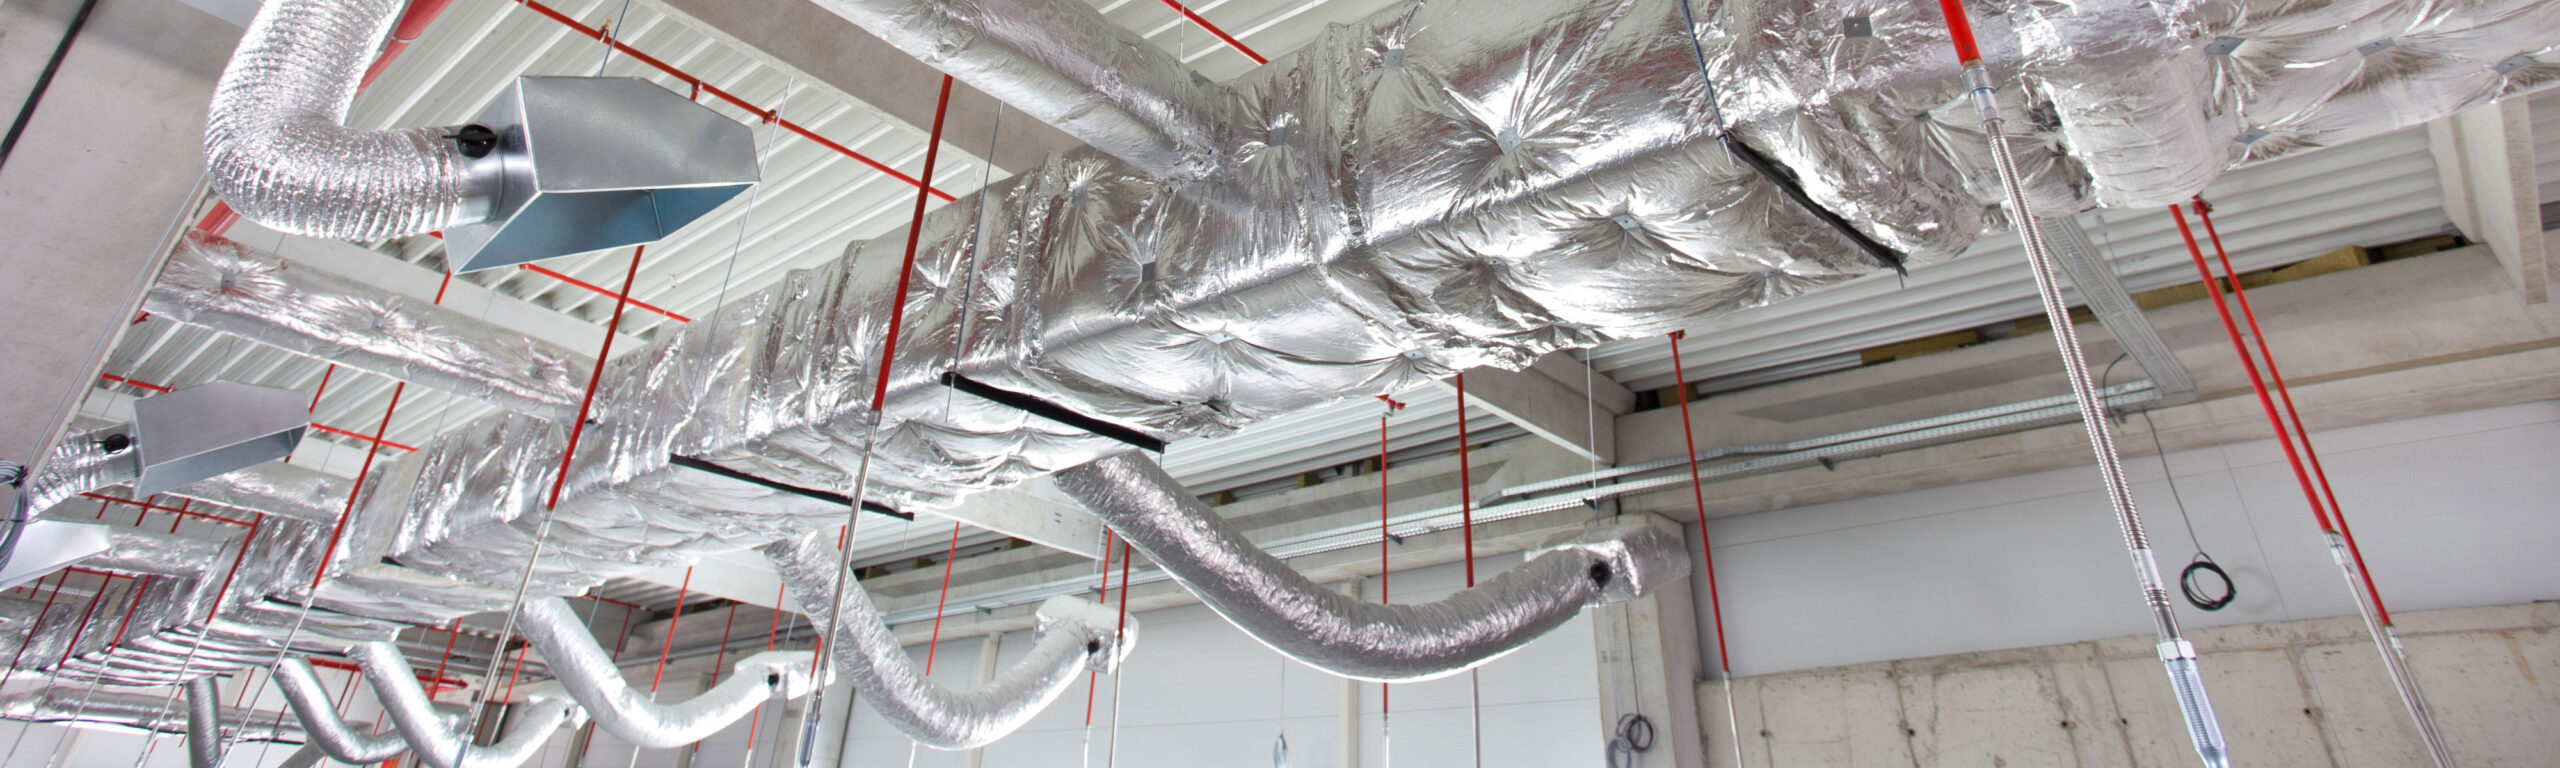 Orem air duct cleaning